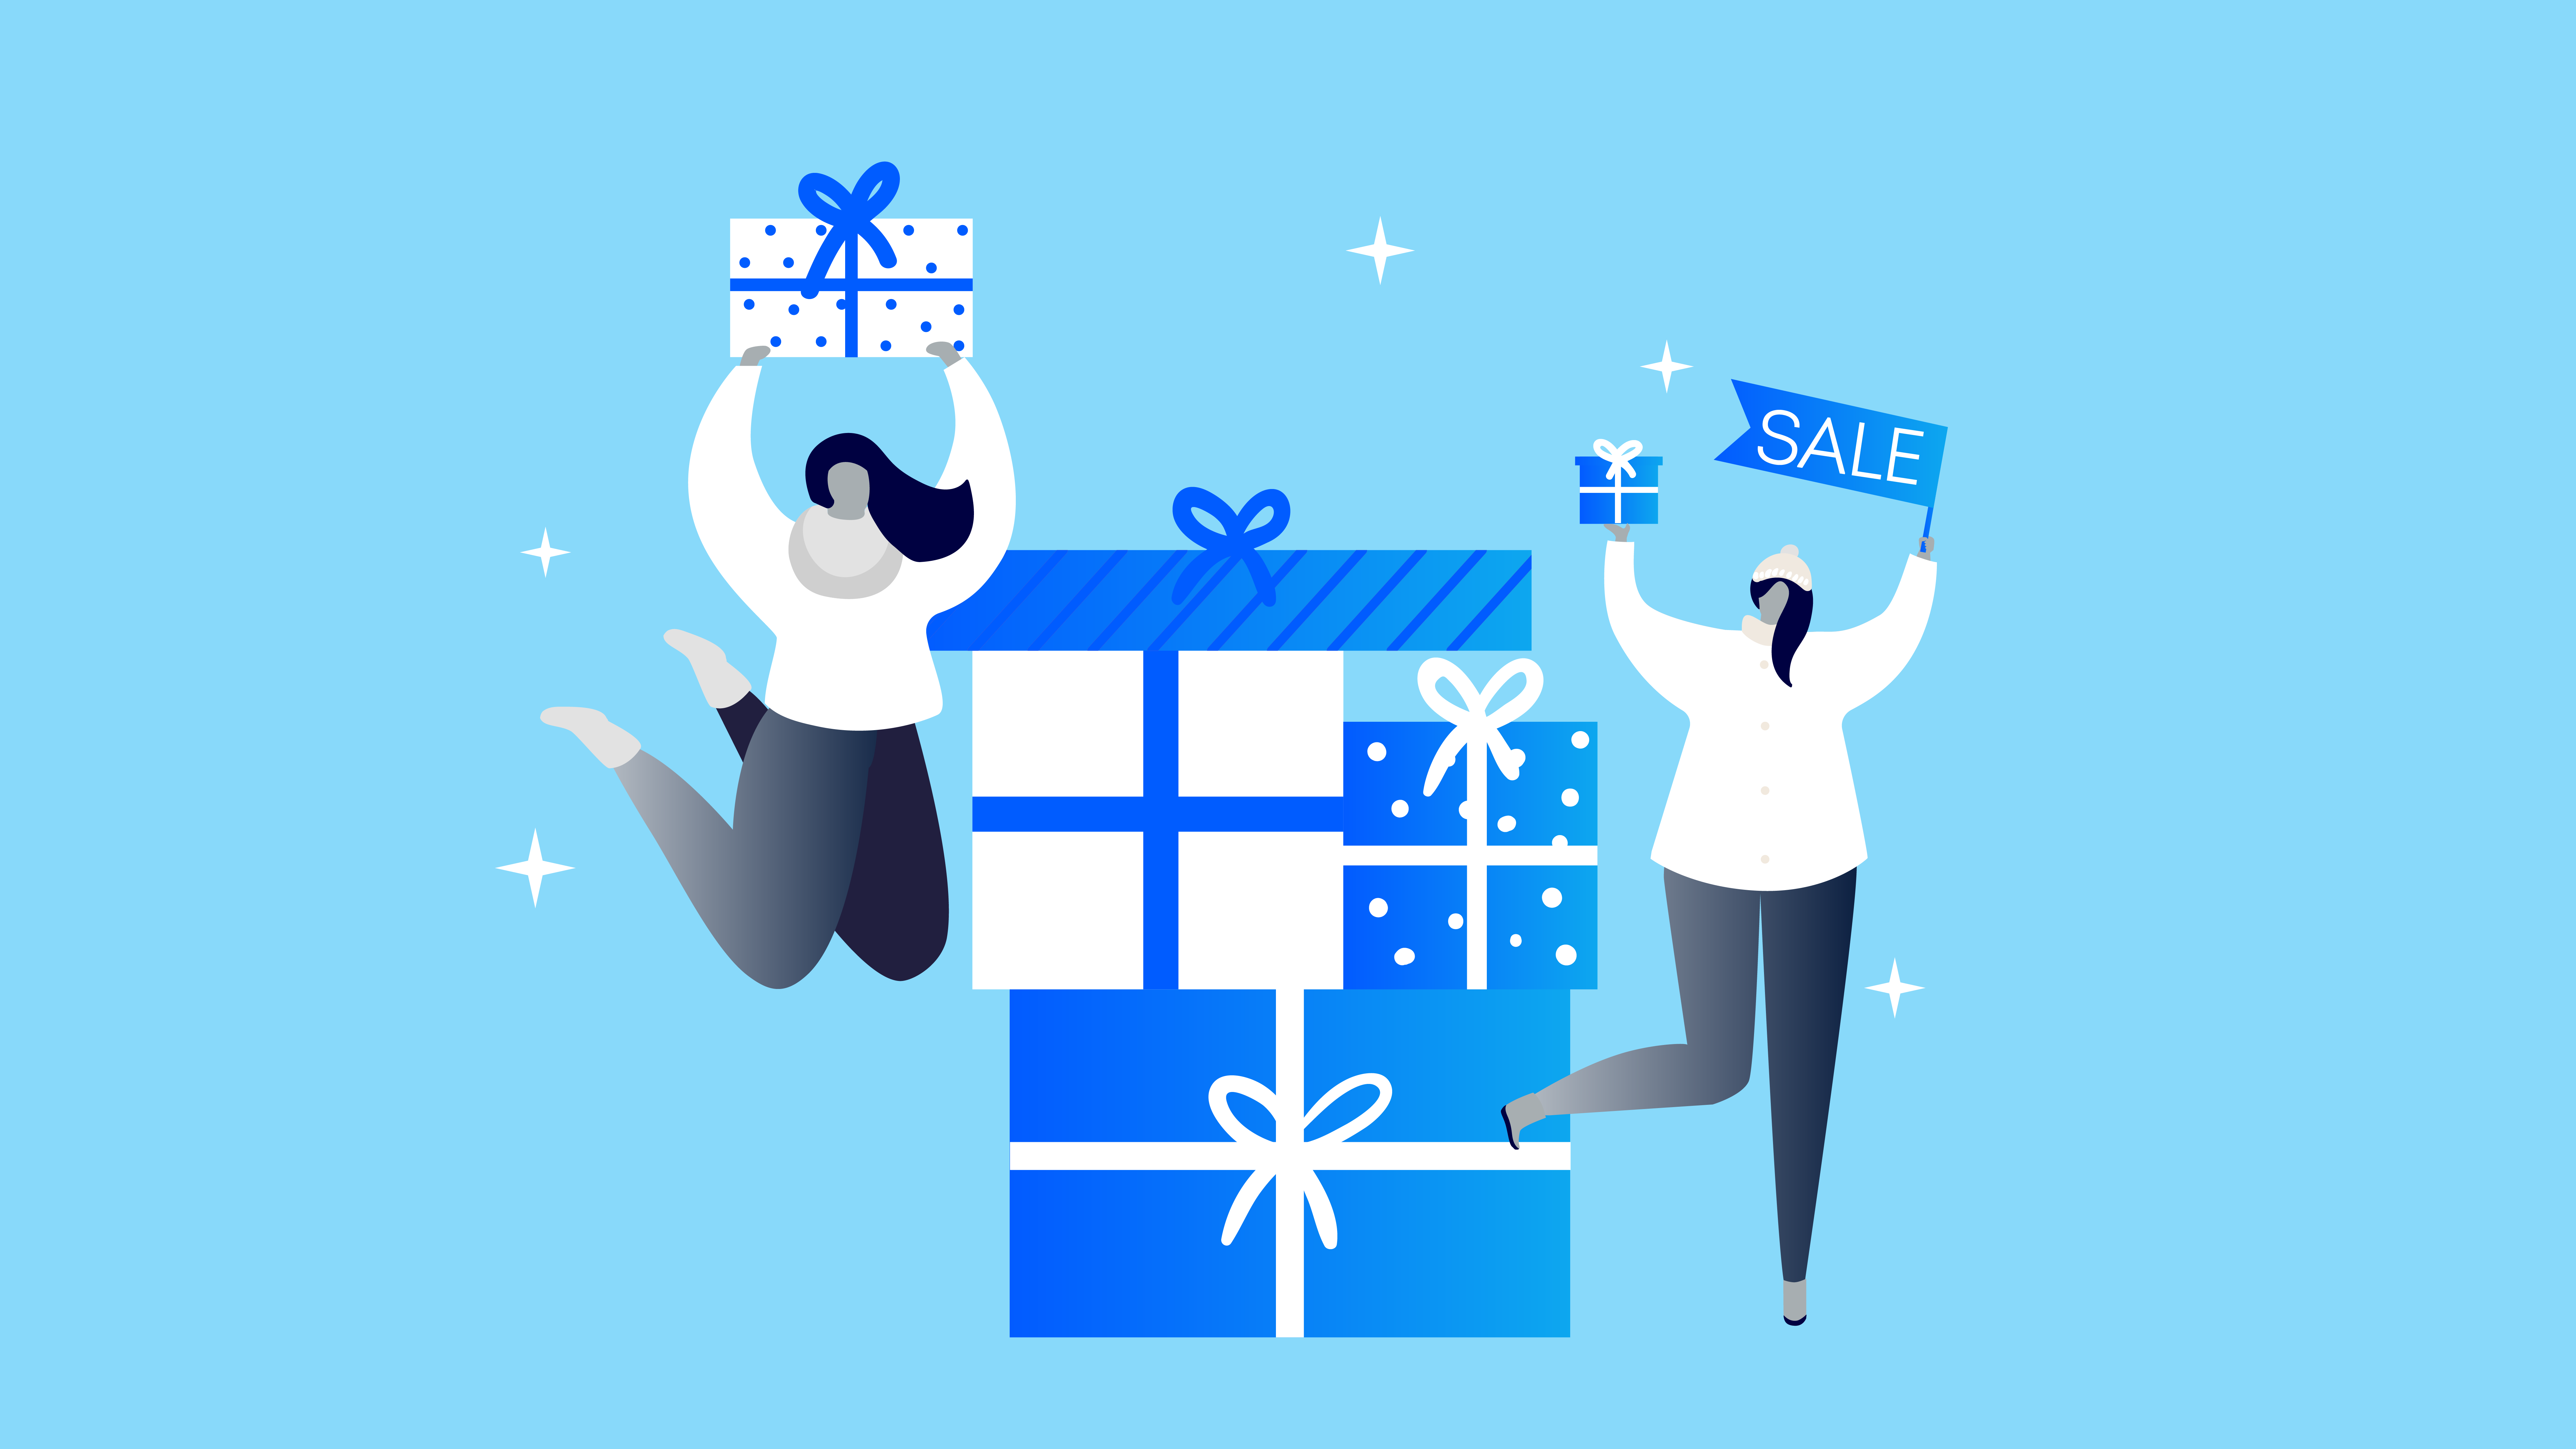 Illustration of two women next to holiday gifts and a sale sign.